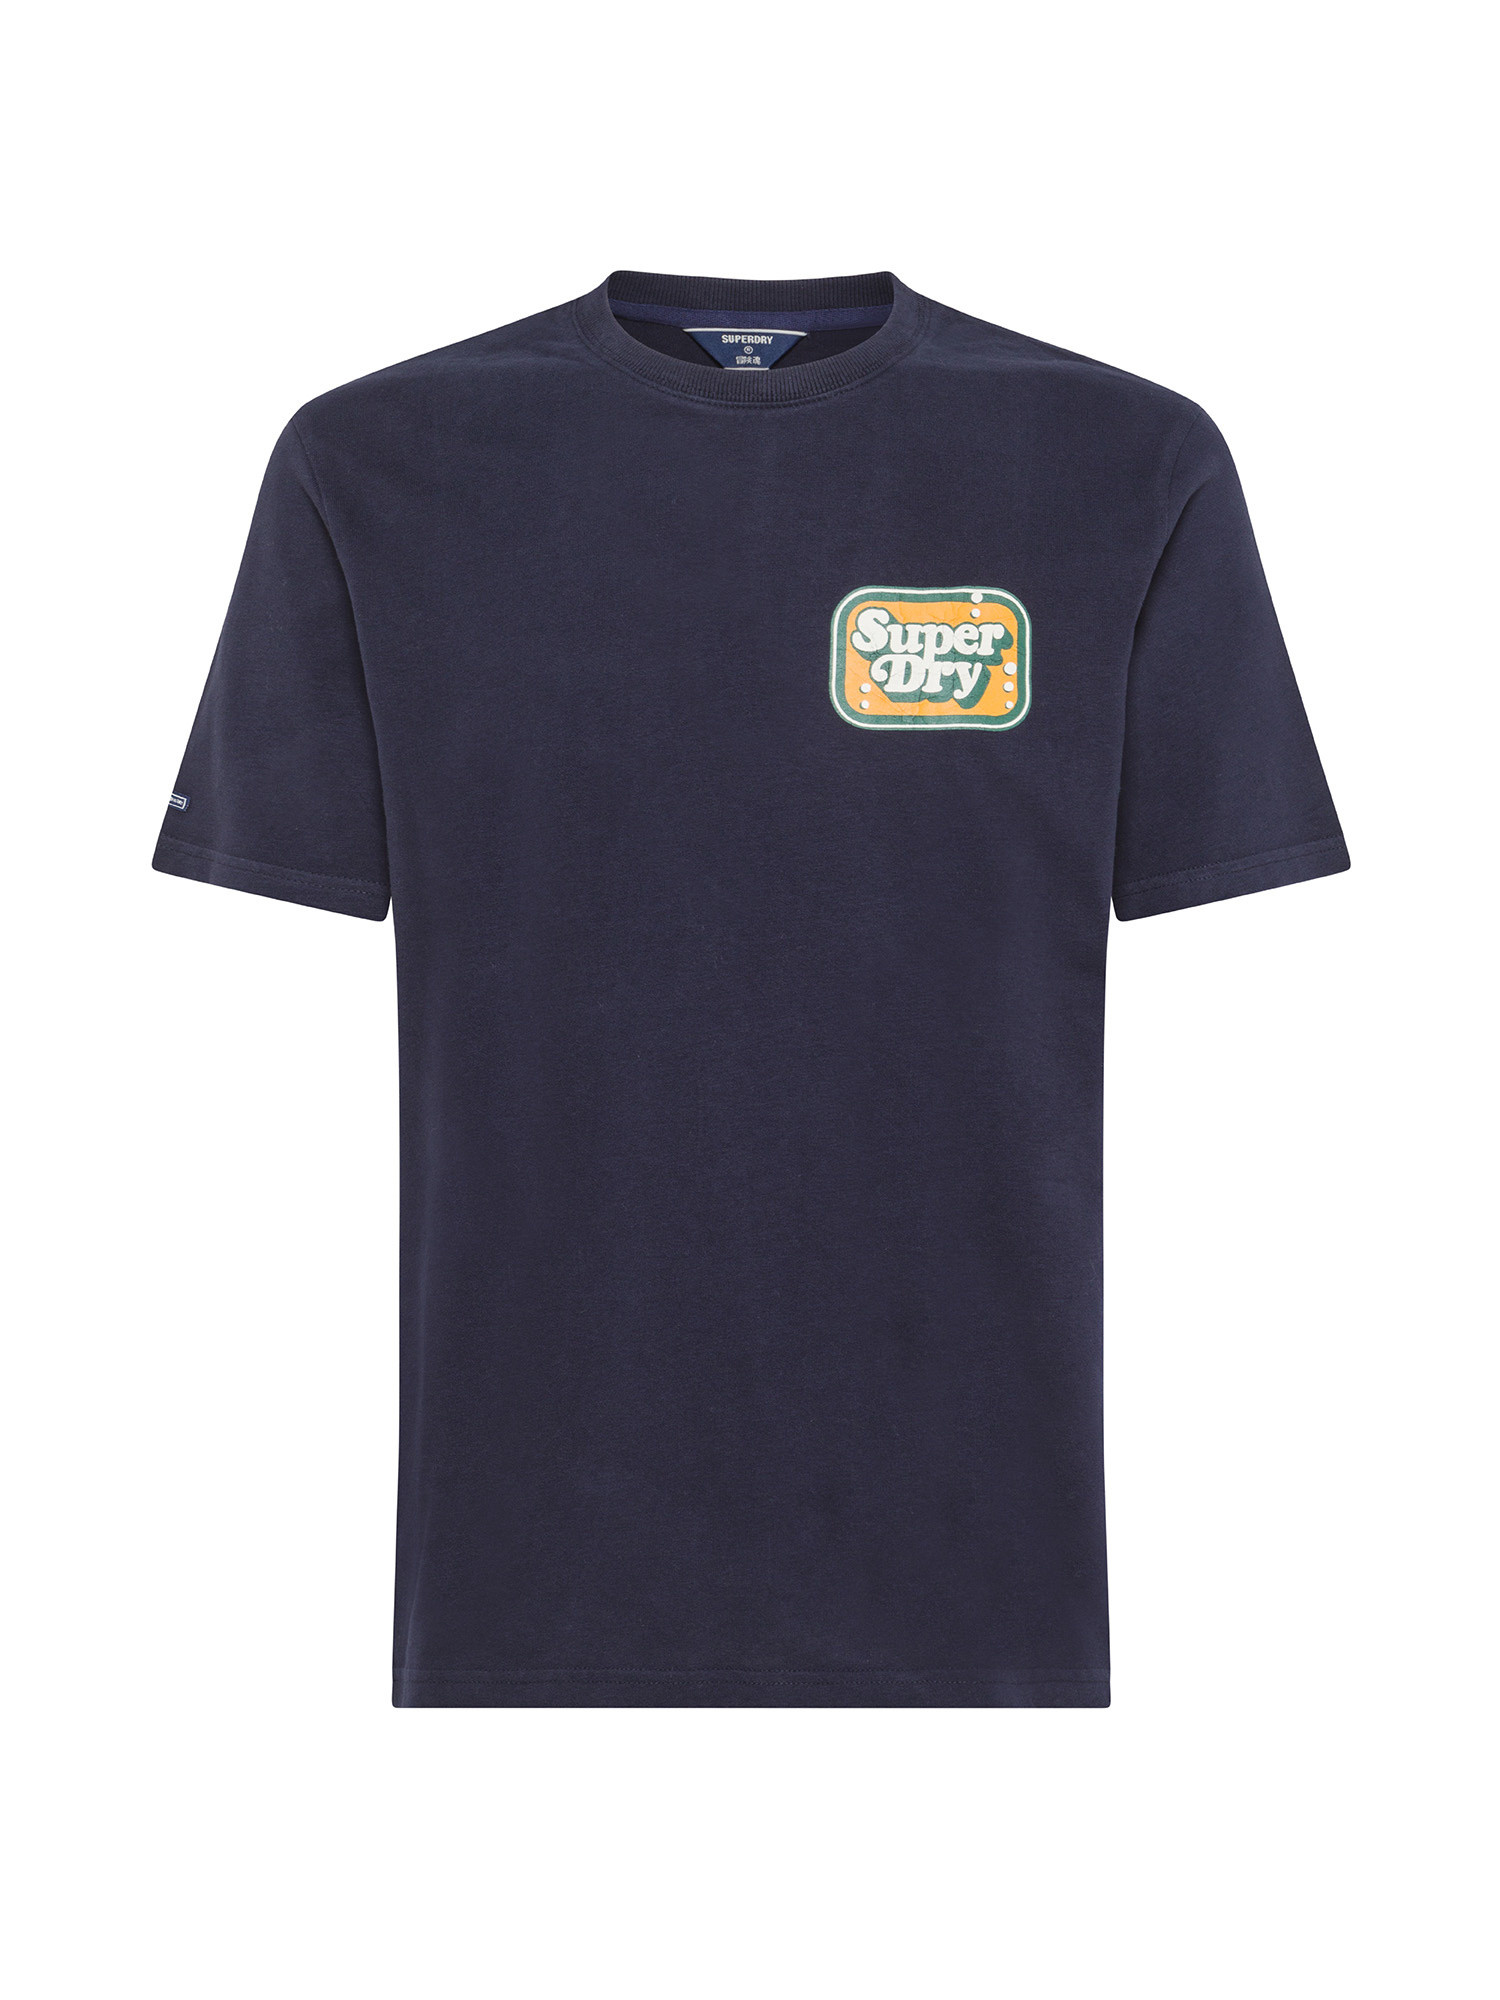 Superdry - T-shirt with graphic print, Dark Blue, large image number 0